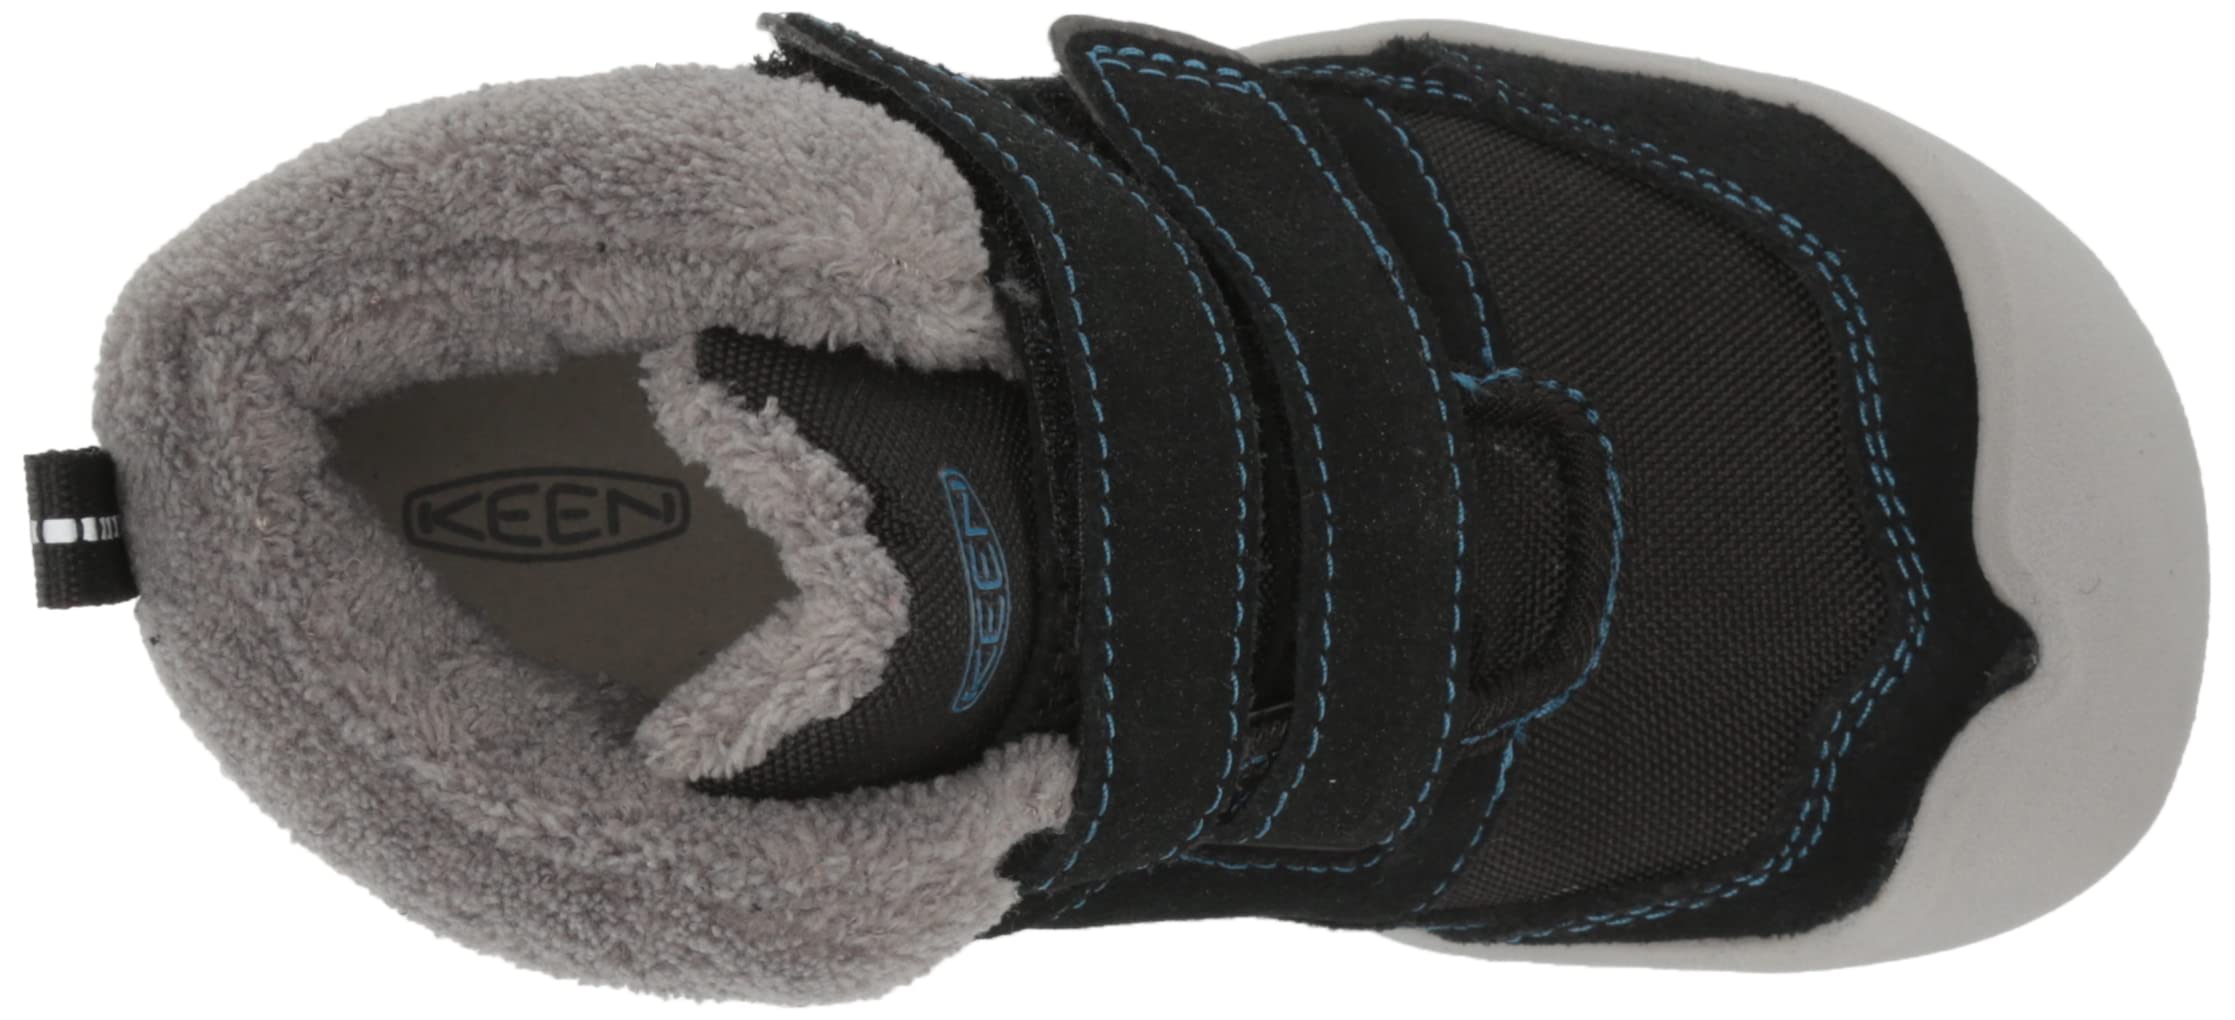 KEEN Unisex-Child Knotch Chukka Ds Mid Height Insulated Boots